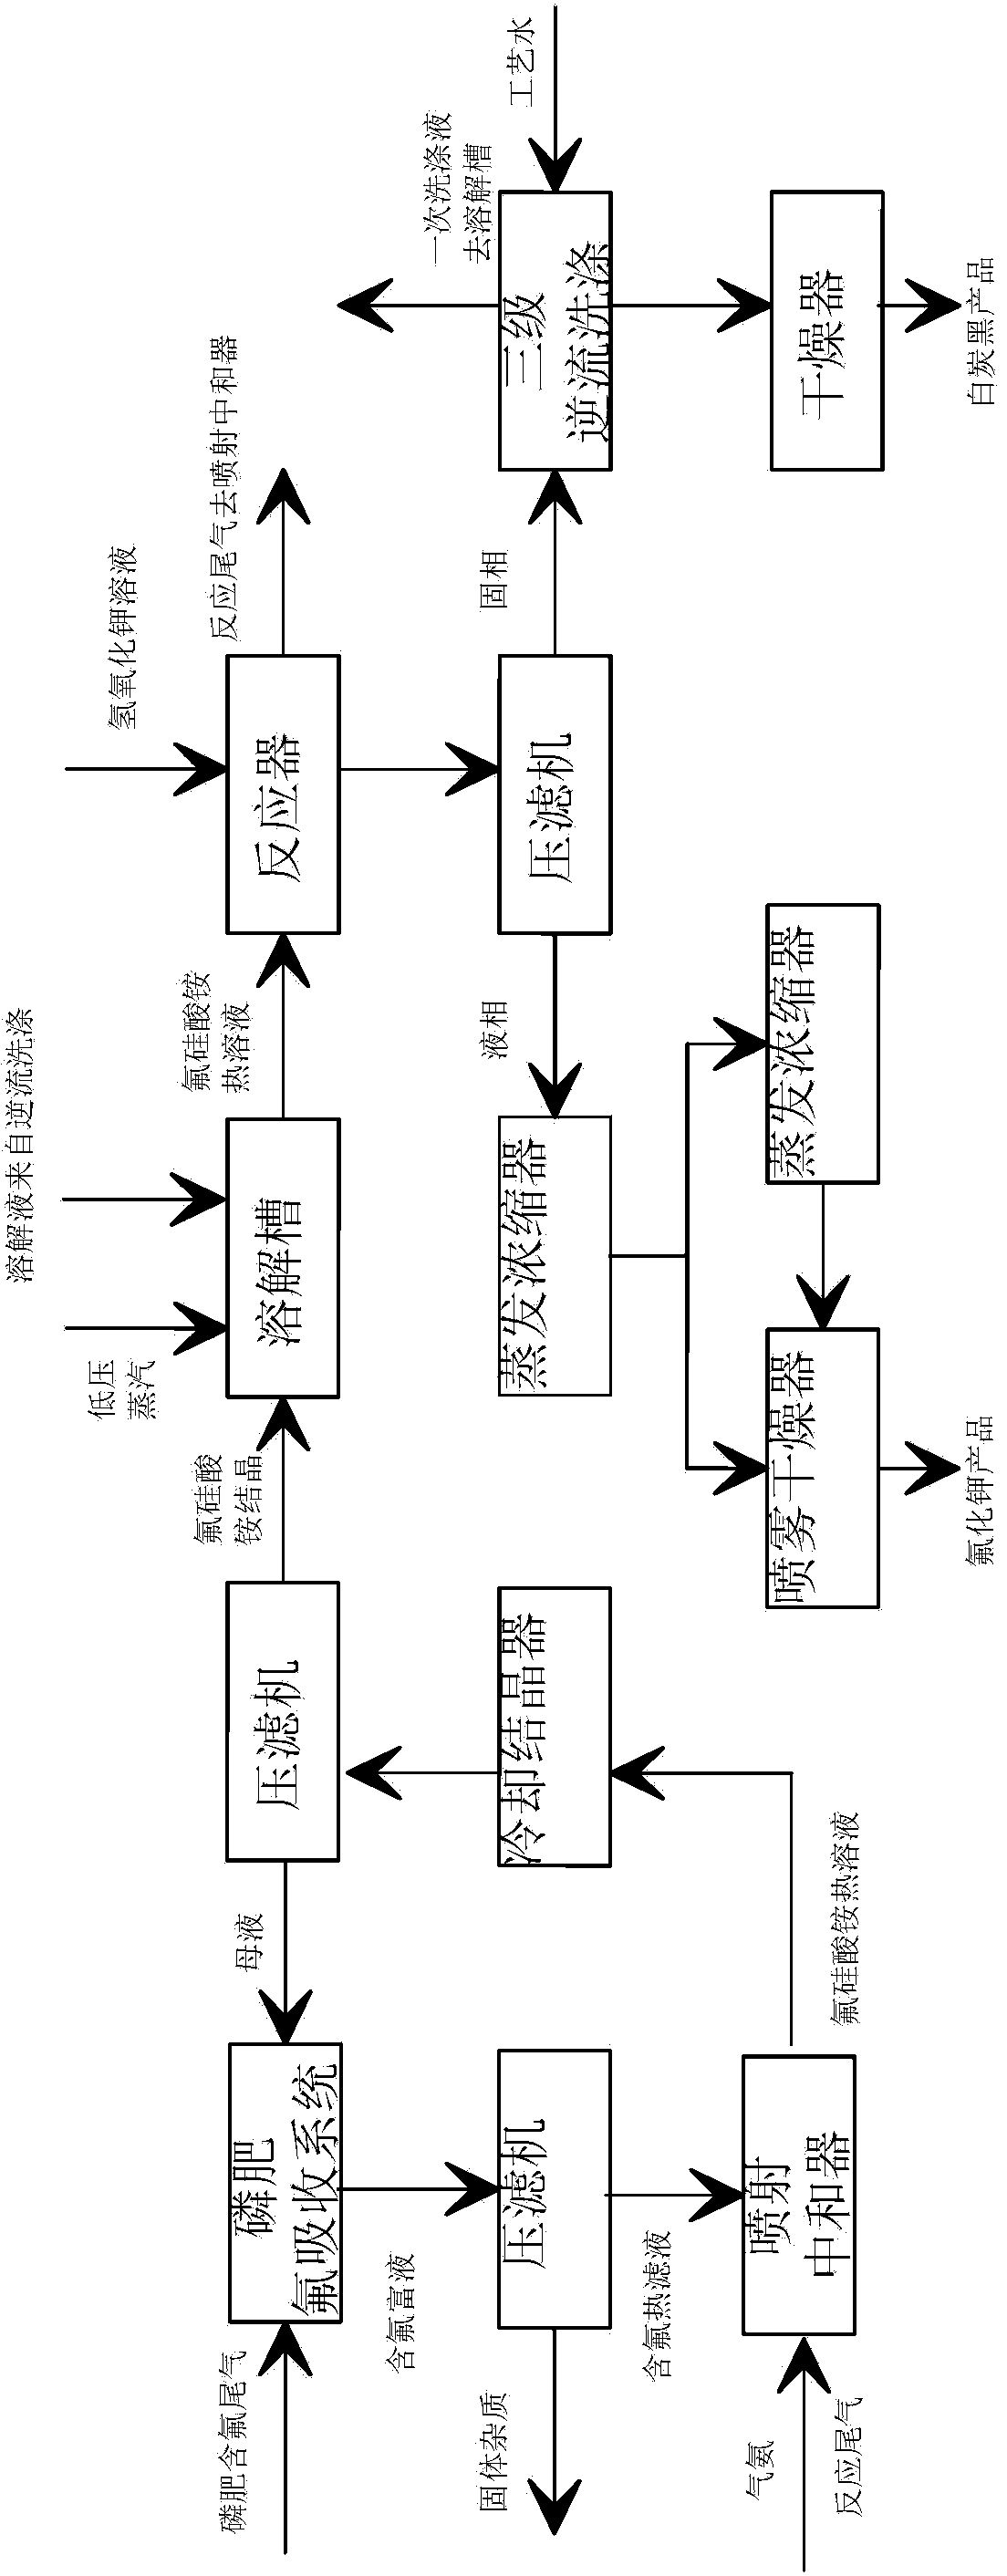 Method for preparing potassium fluoride and coproducing ultrafine white carbon black from ammonium fluorosilicate byproduct in phosphate fertilizer production